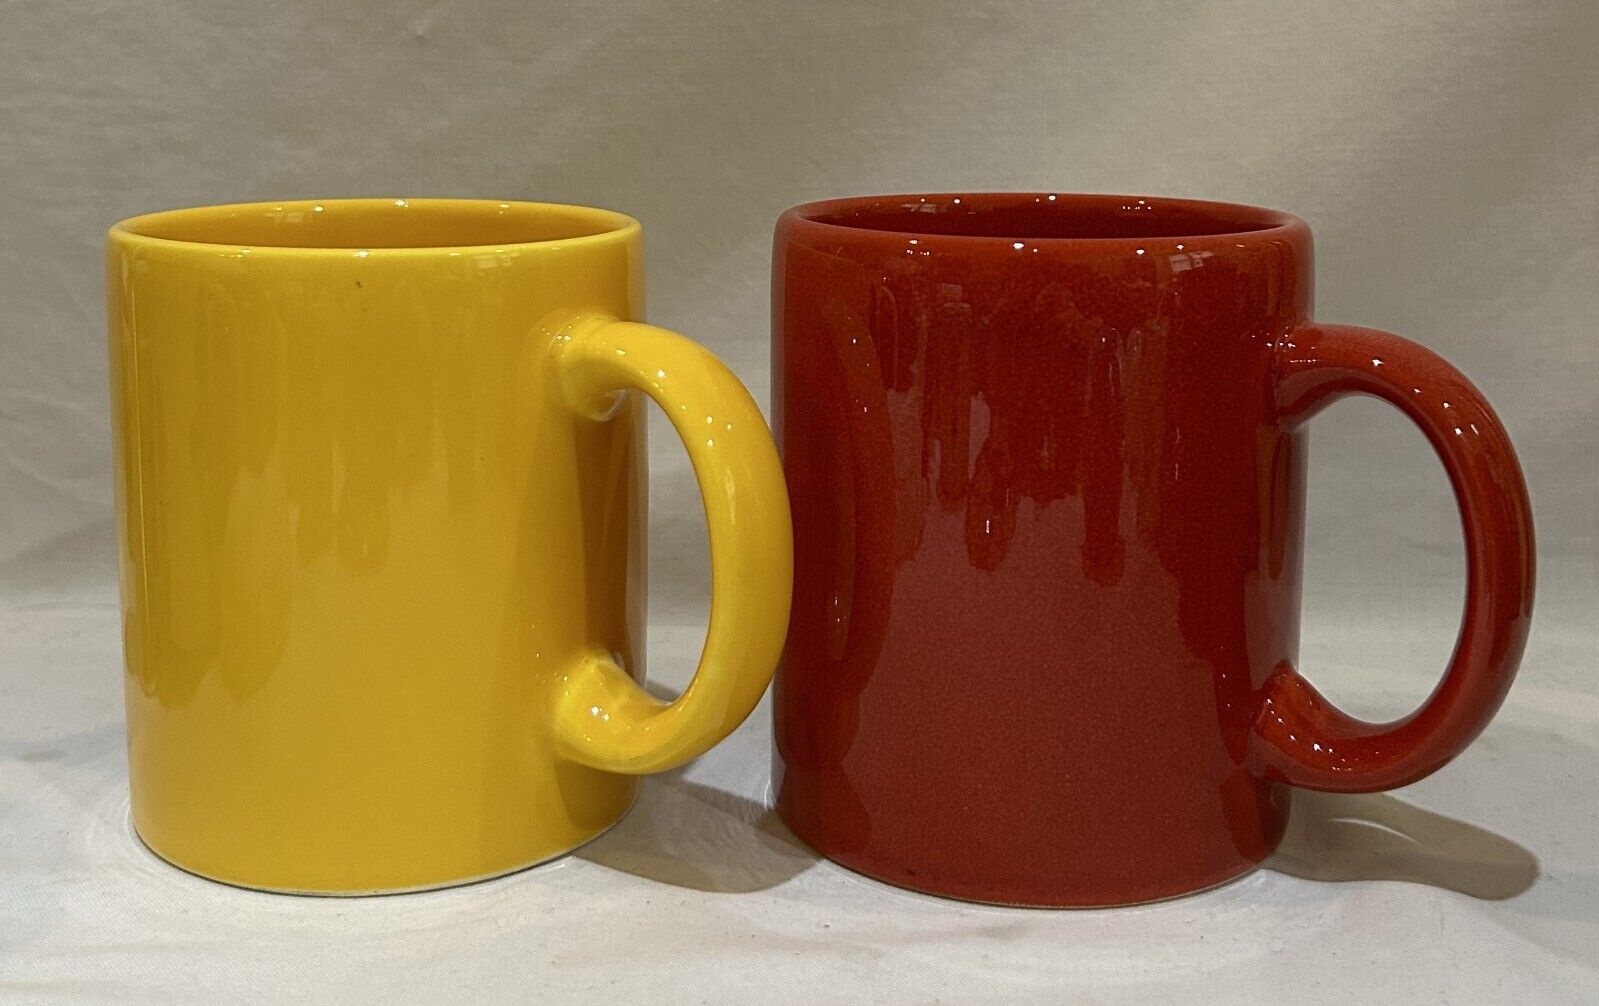 Pair of VTG Waechtersbach Ceramic Coffee Mugs Solid Red & Yellow Made in Spain